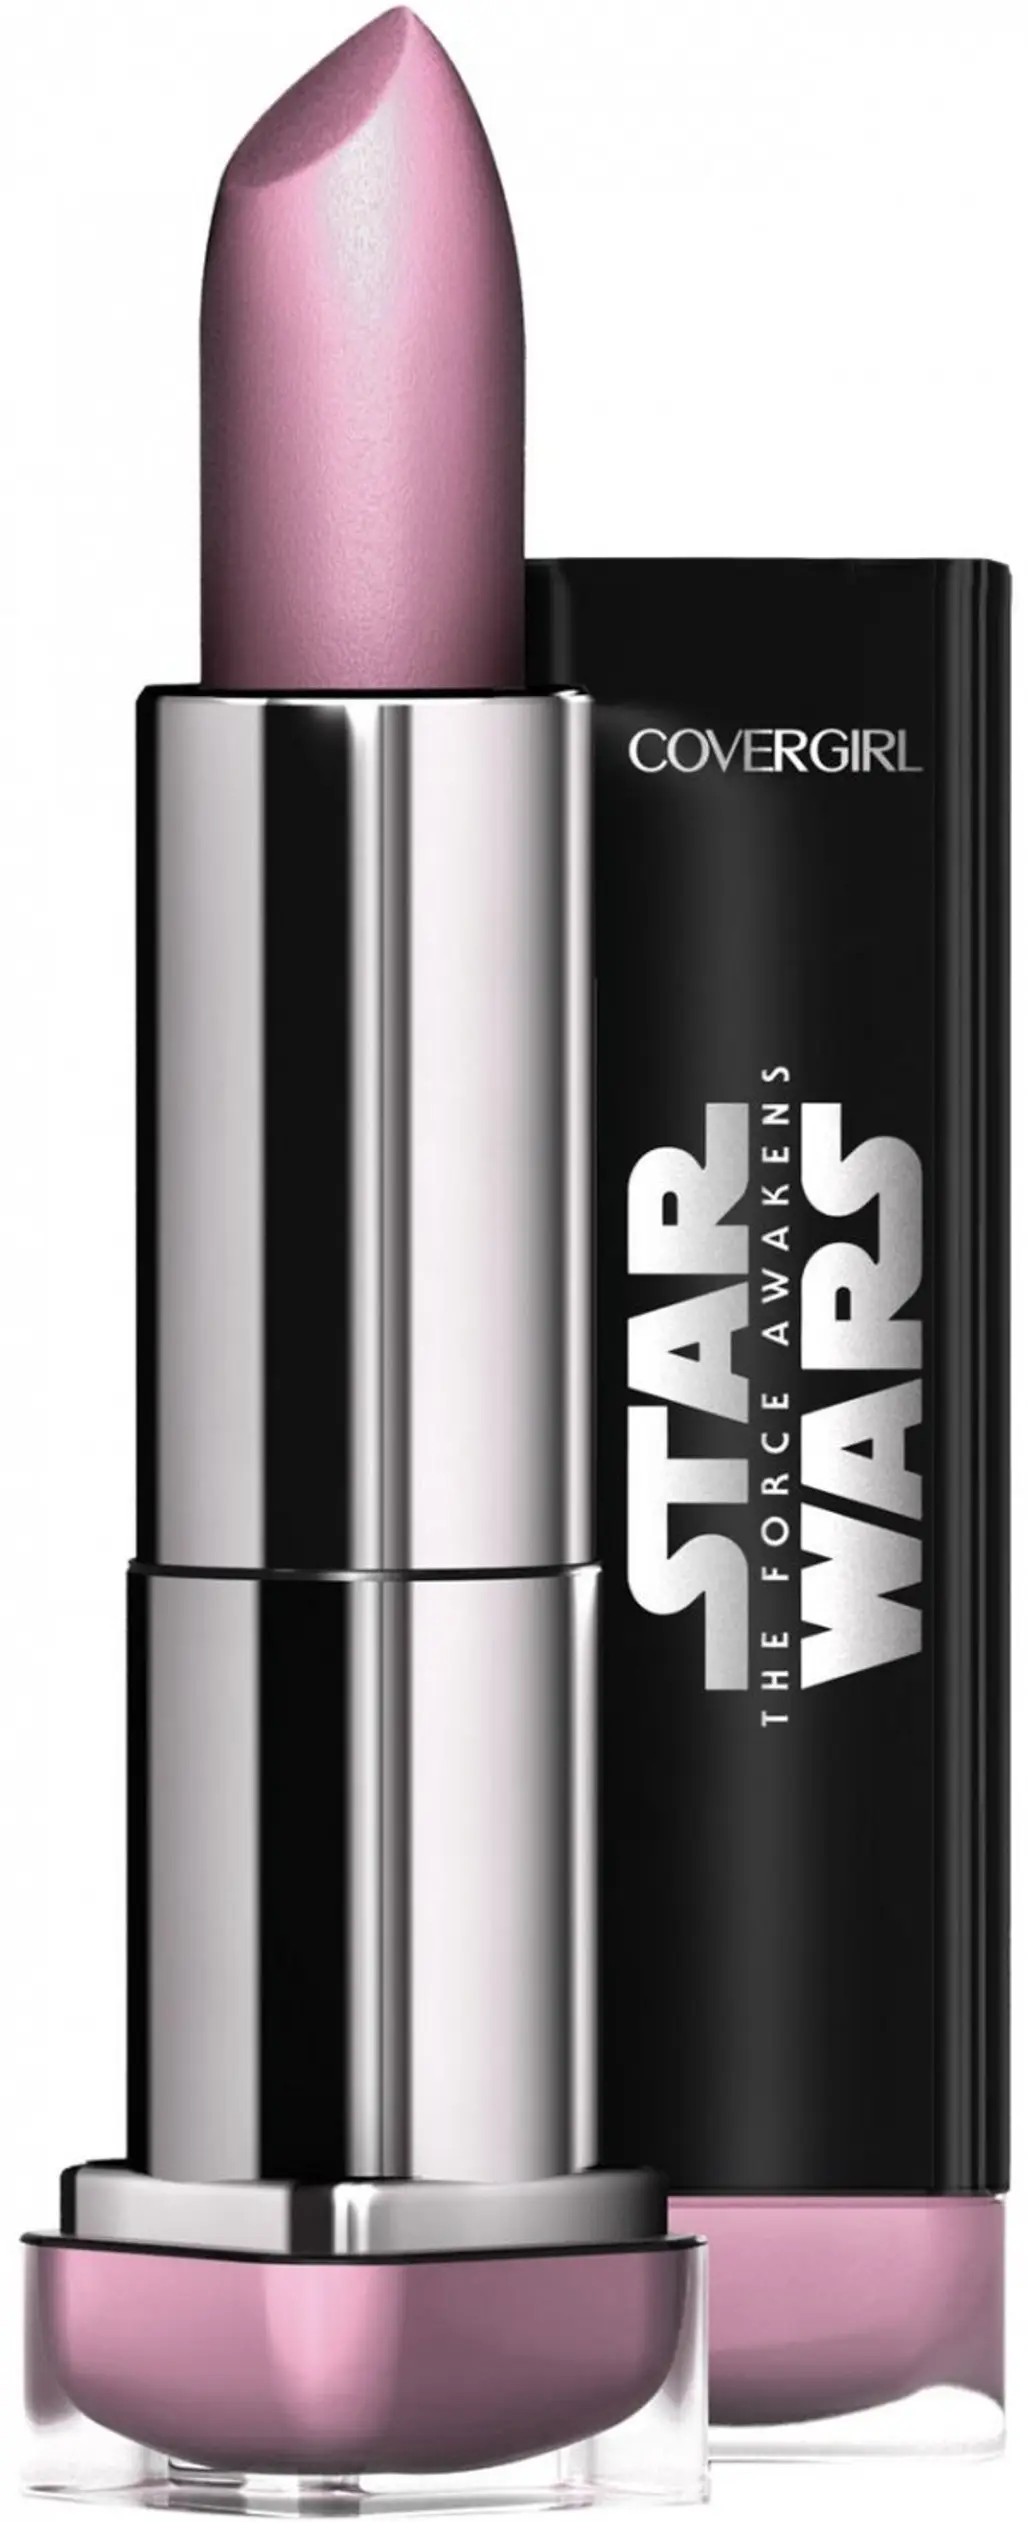 CoverGirl Star Wars Colorlicious Lipstick in Lilac